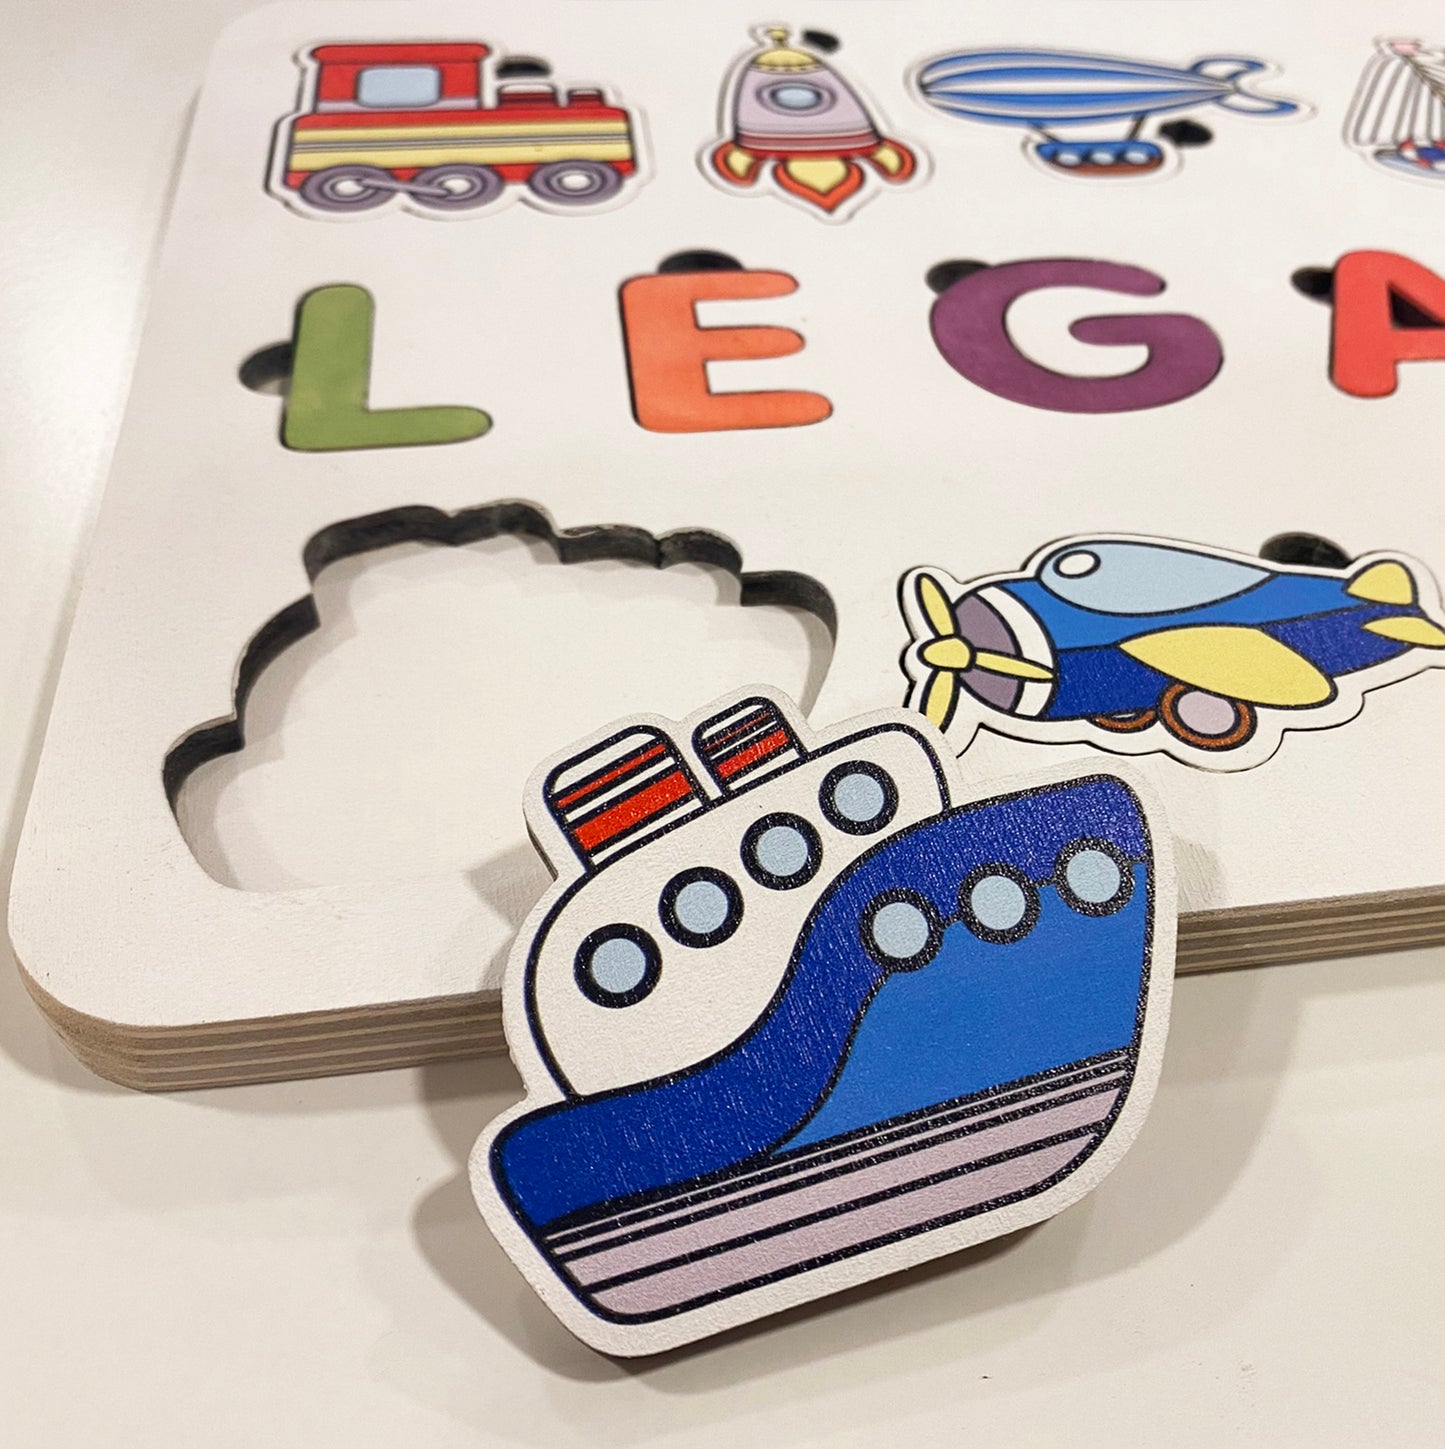 Custom Name Puzzle with Cars, Planes, Automobiles and Space Ship - First Birthday Gift for Boy or Girl